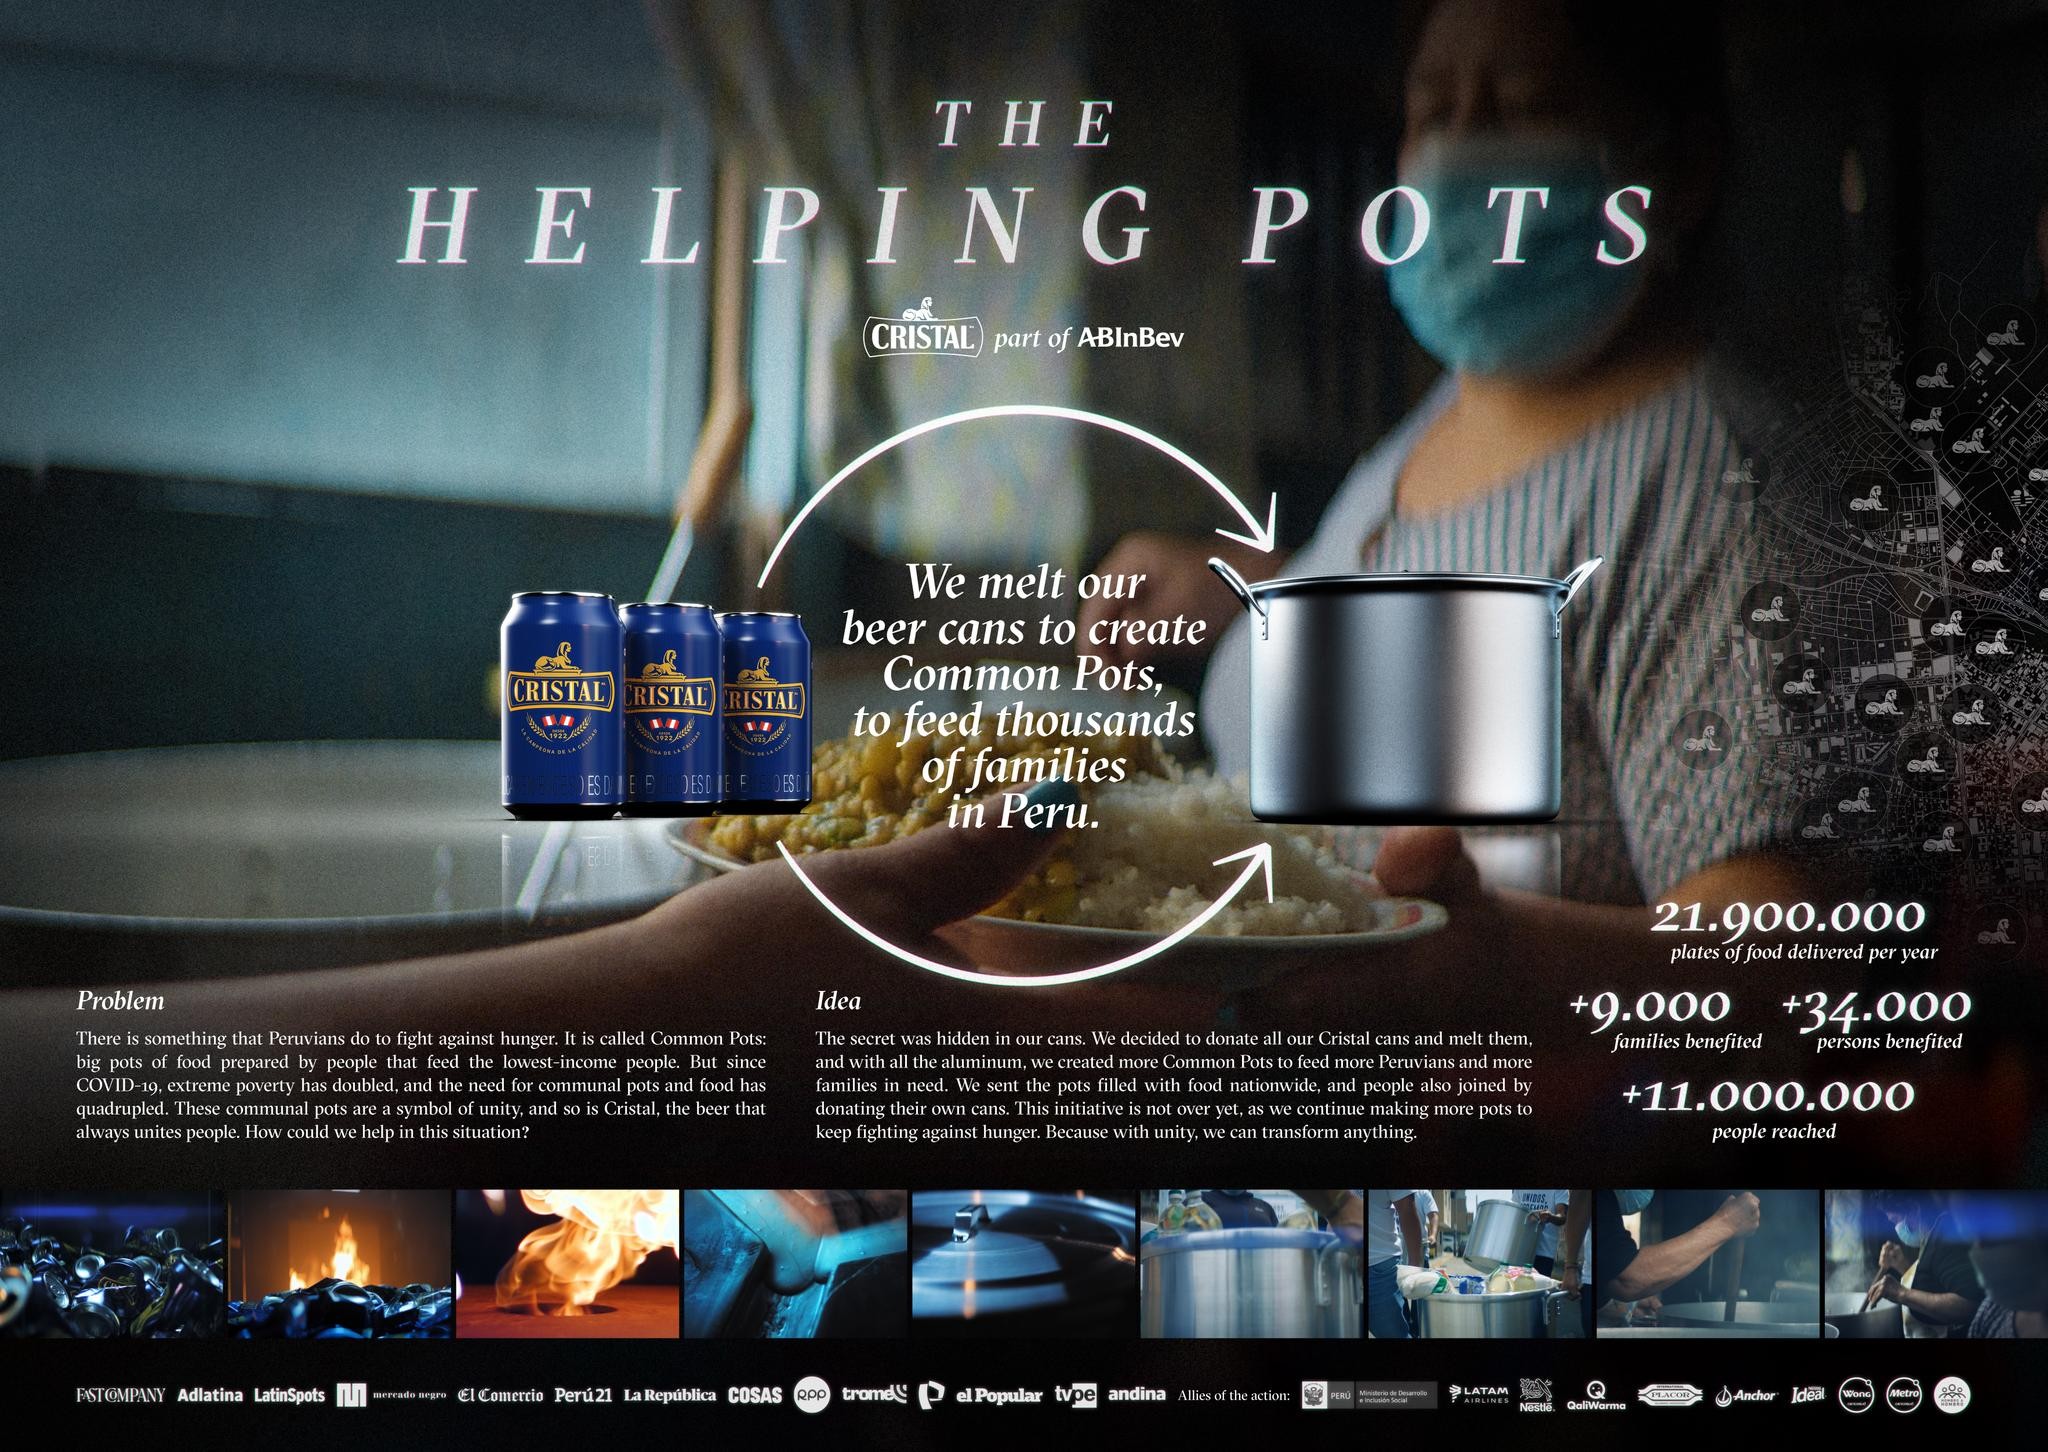 The Helping Pots